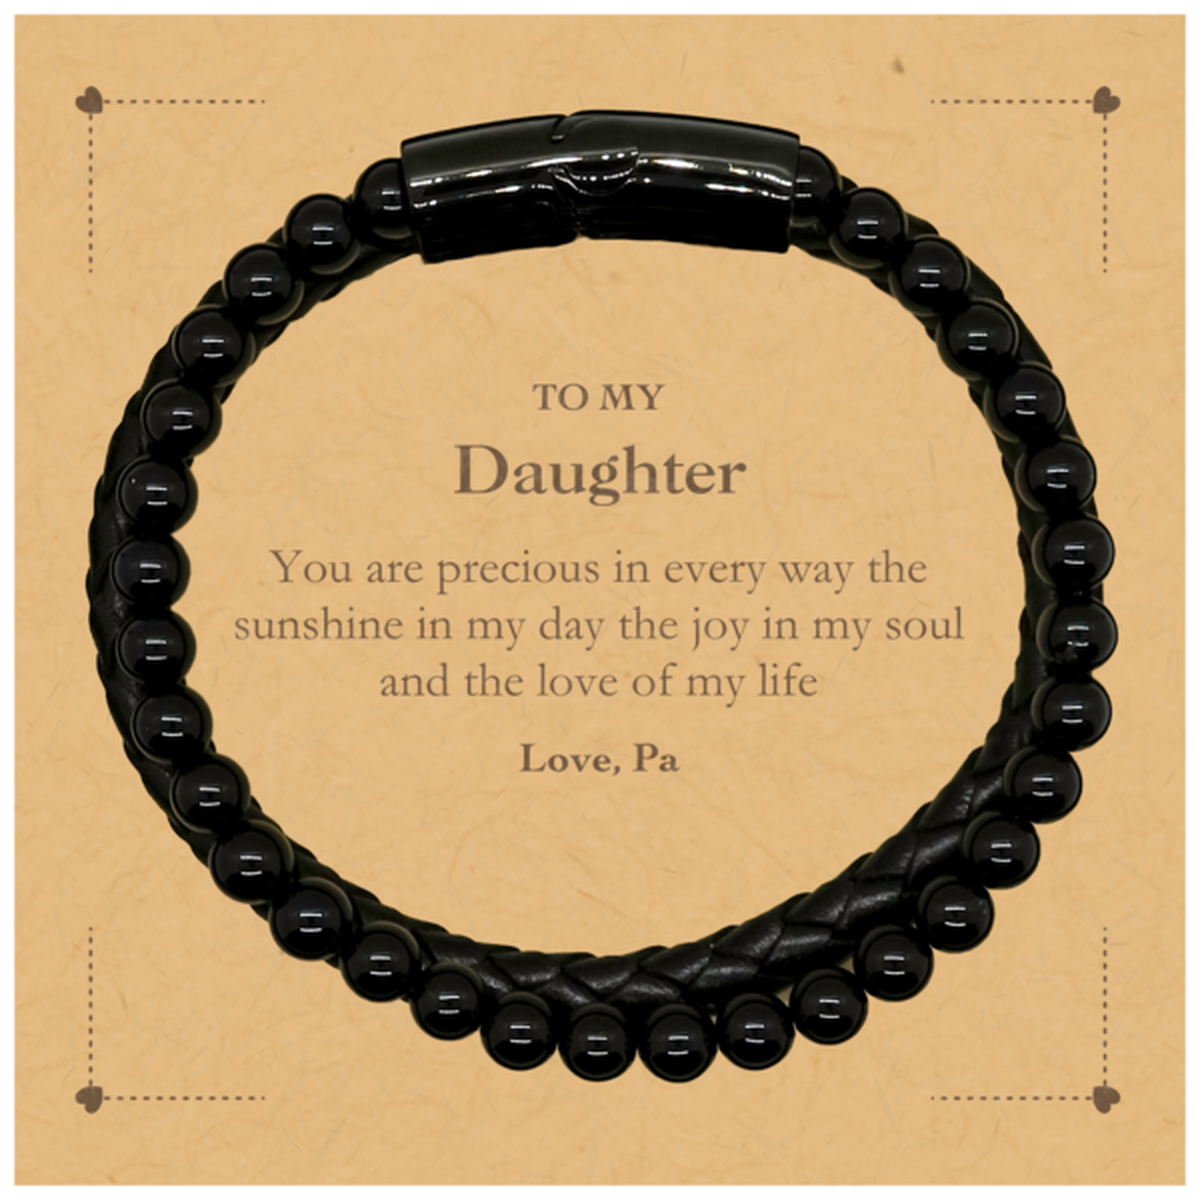 Graduation Gifts for Daughter Stone Leather Bracelets Present from Pa, Christmas Daughter Birthday Gifts Daughter You are precious in every way the sunshine in my day. Love, Pa